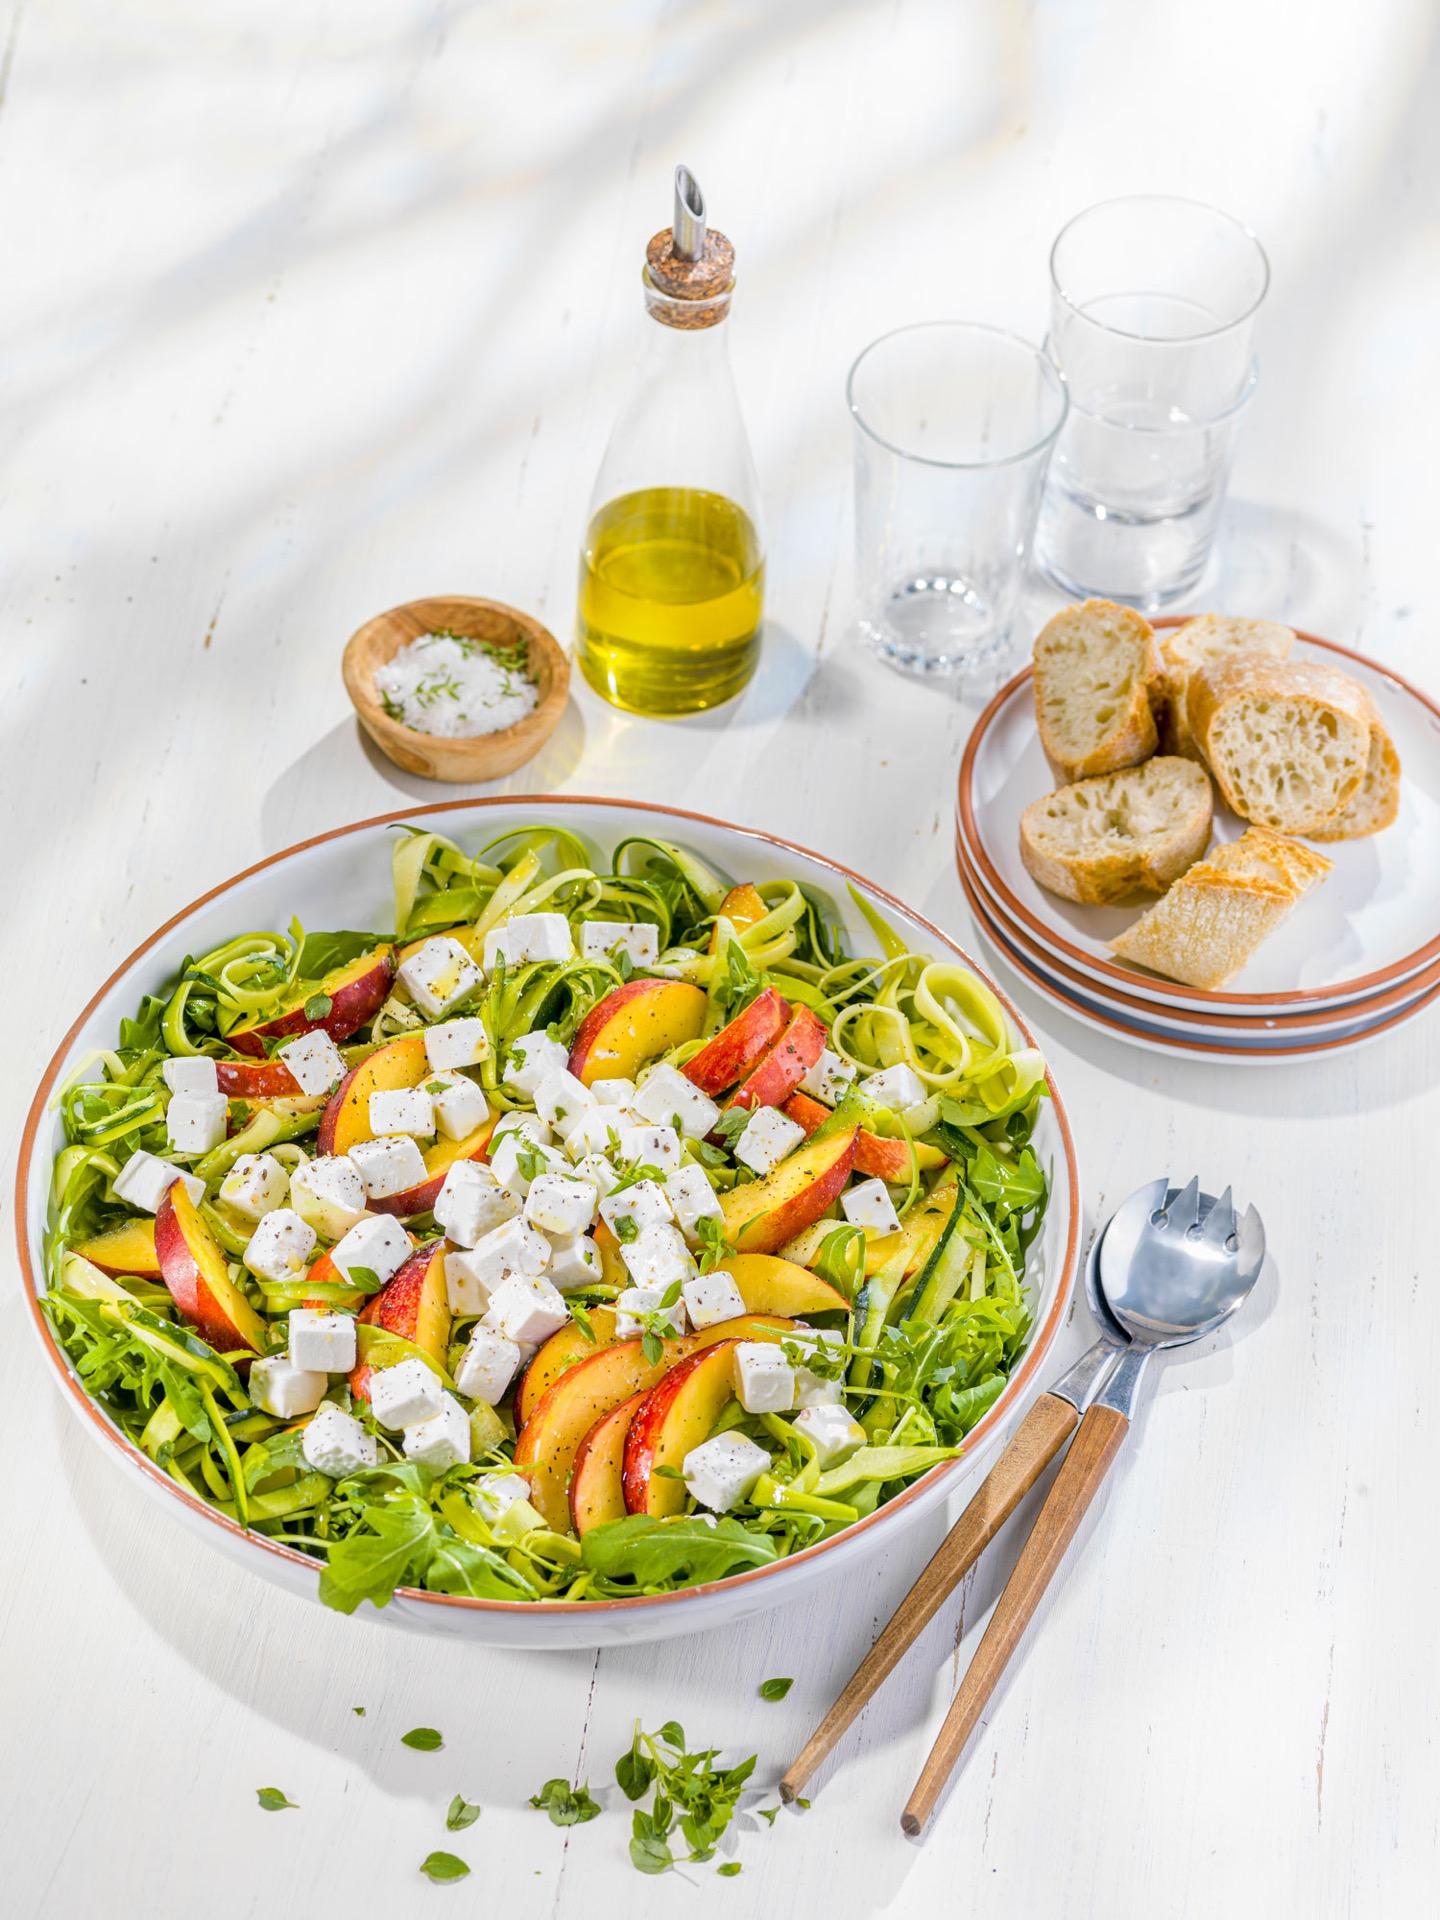 Courgettisalade